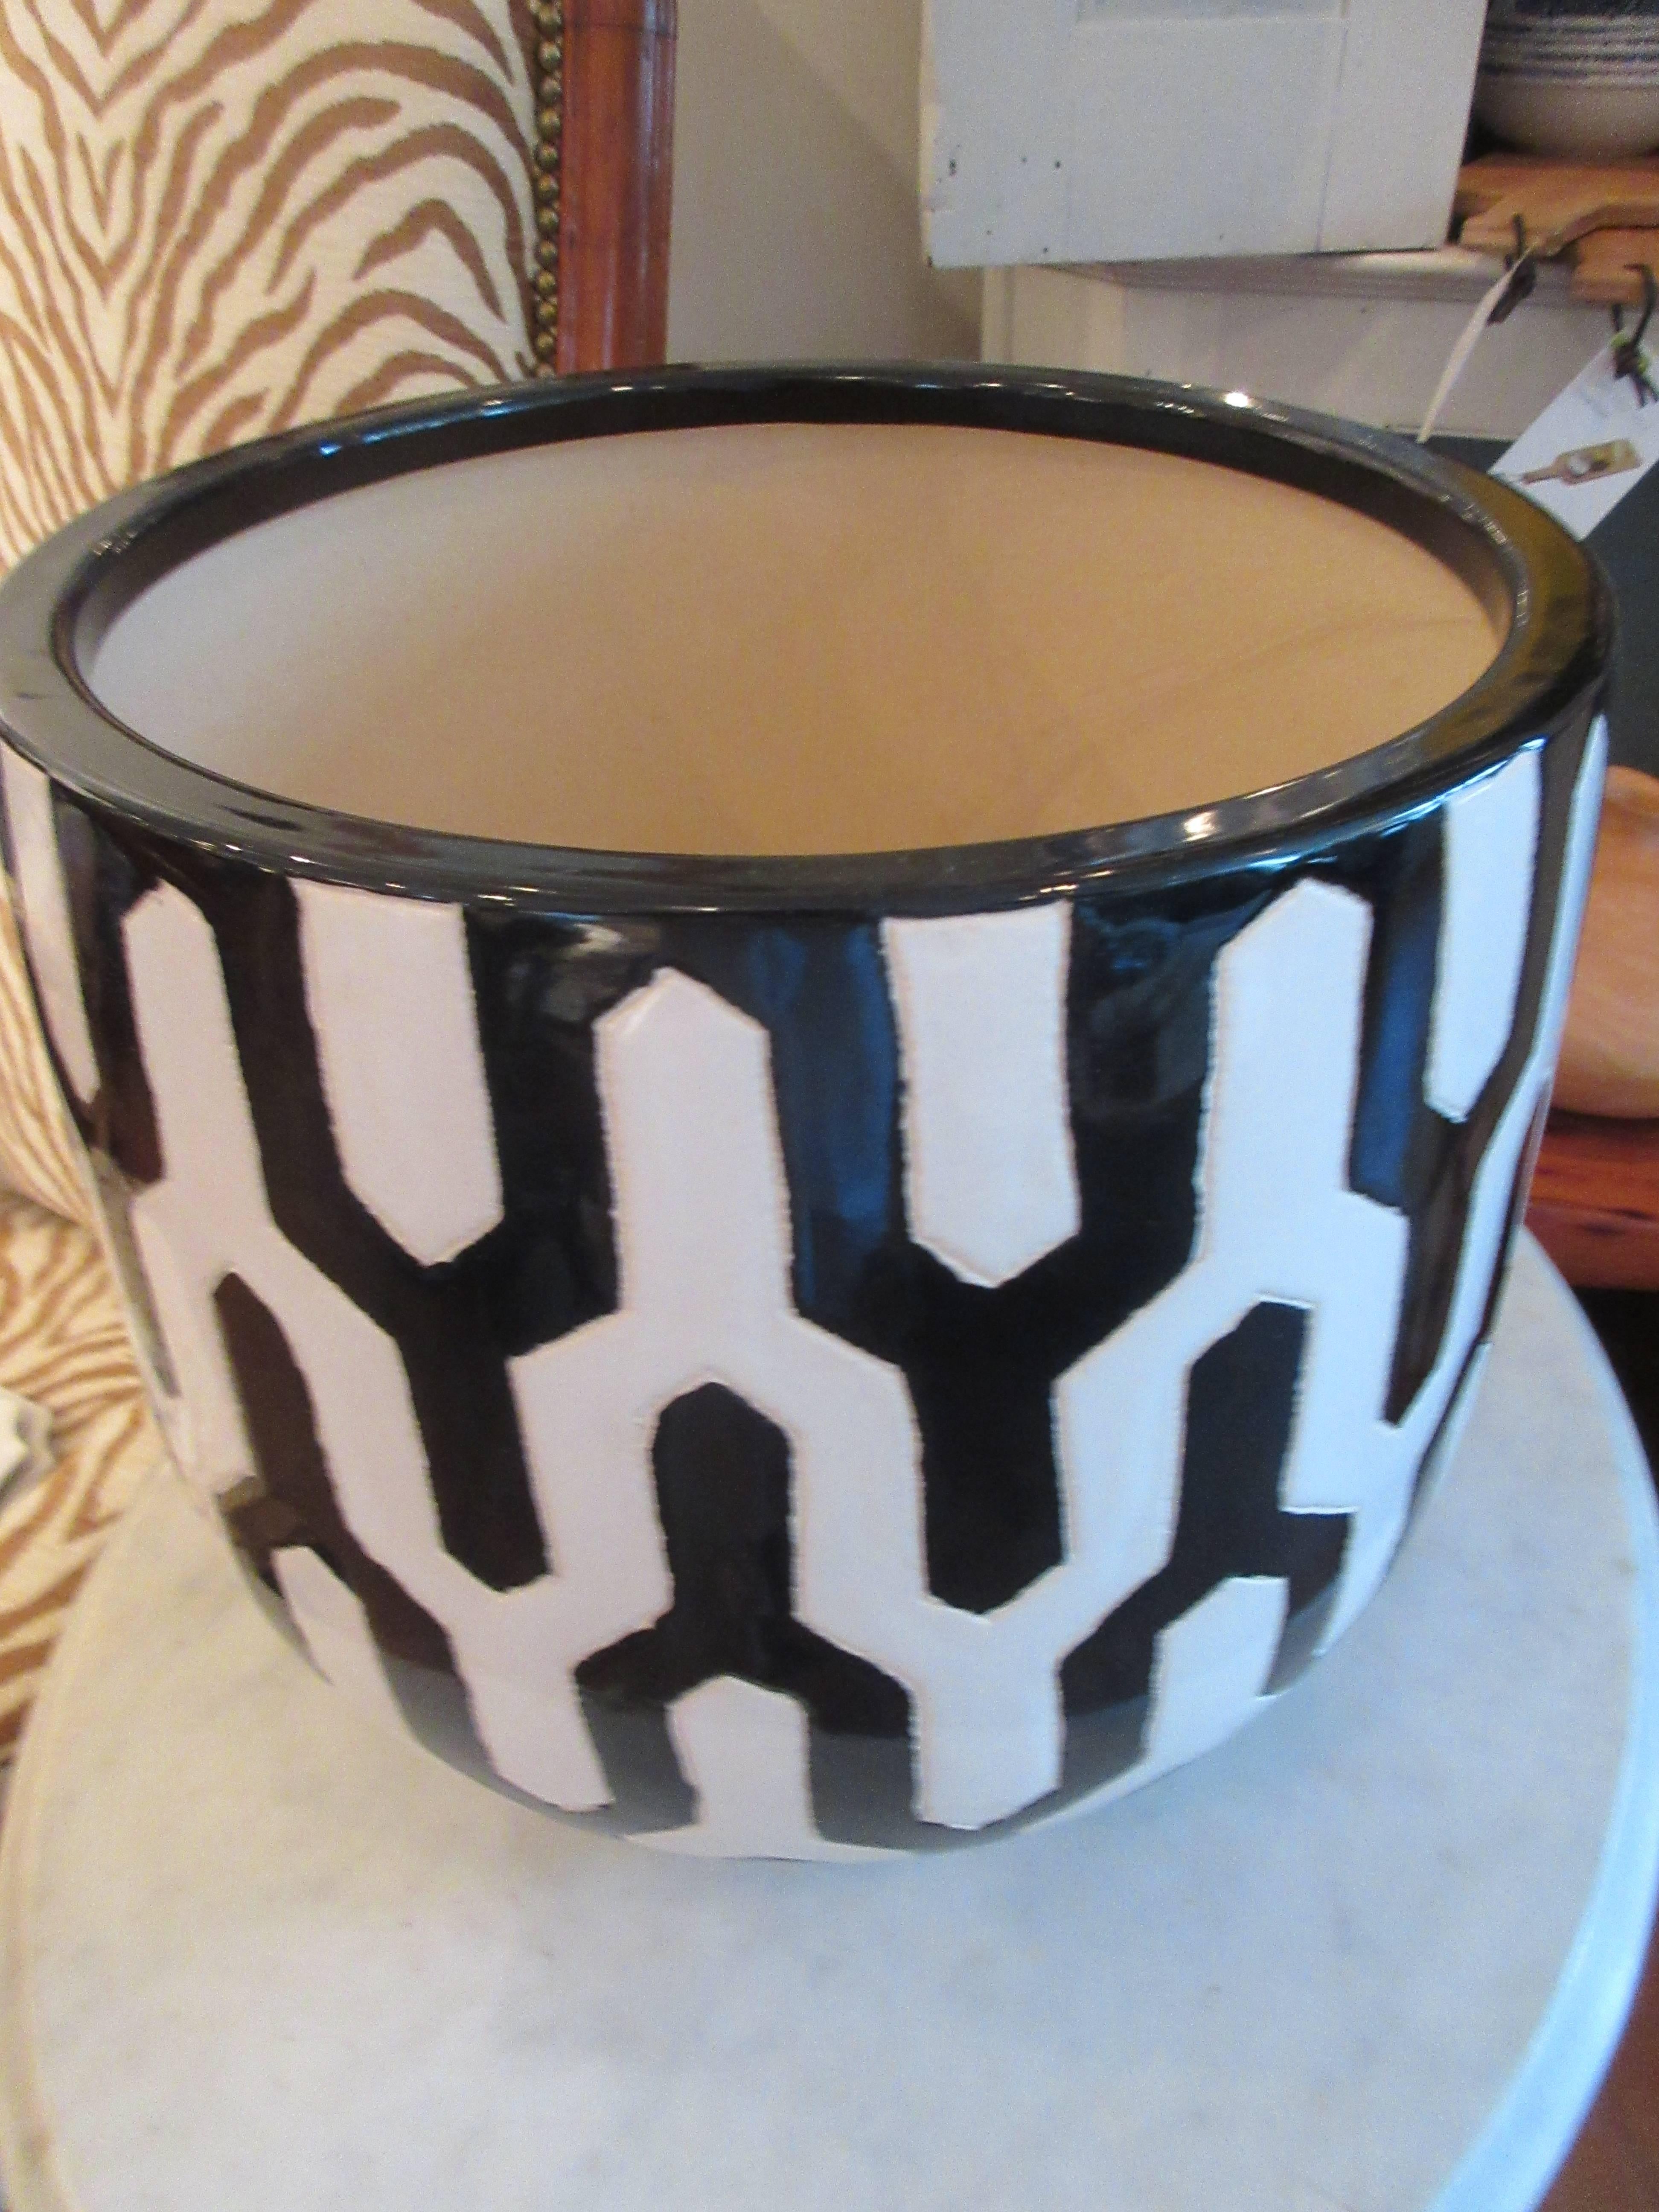 A dramatic Mid-Century handcrafted planter or bowl.
Black and white relief and hand-painted.